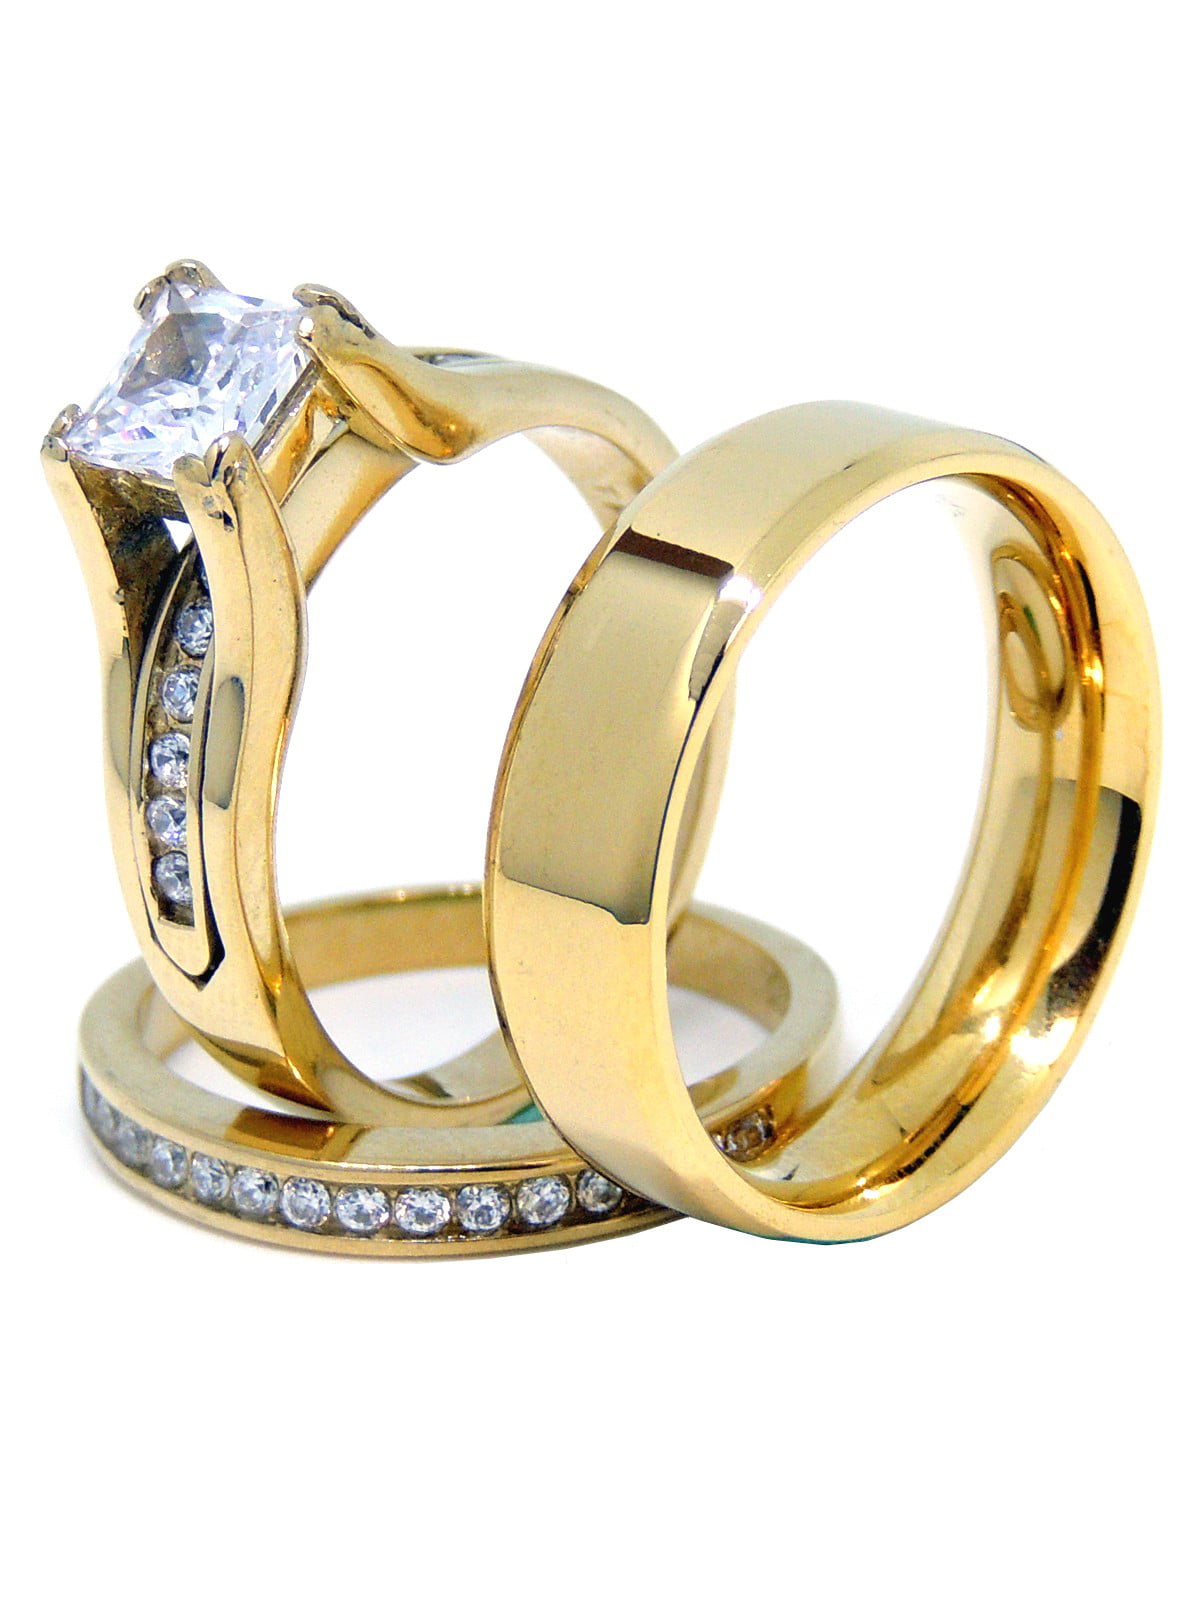 Square Princess CZ Stainless Steel Gold GP Wedding Engagement 2 PC Ring Set 